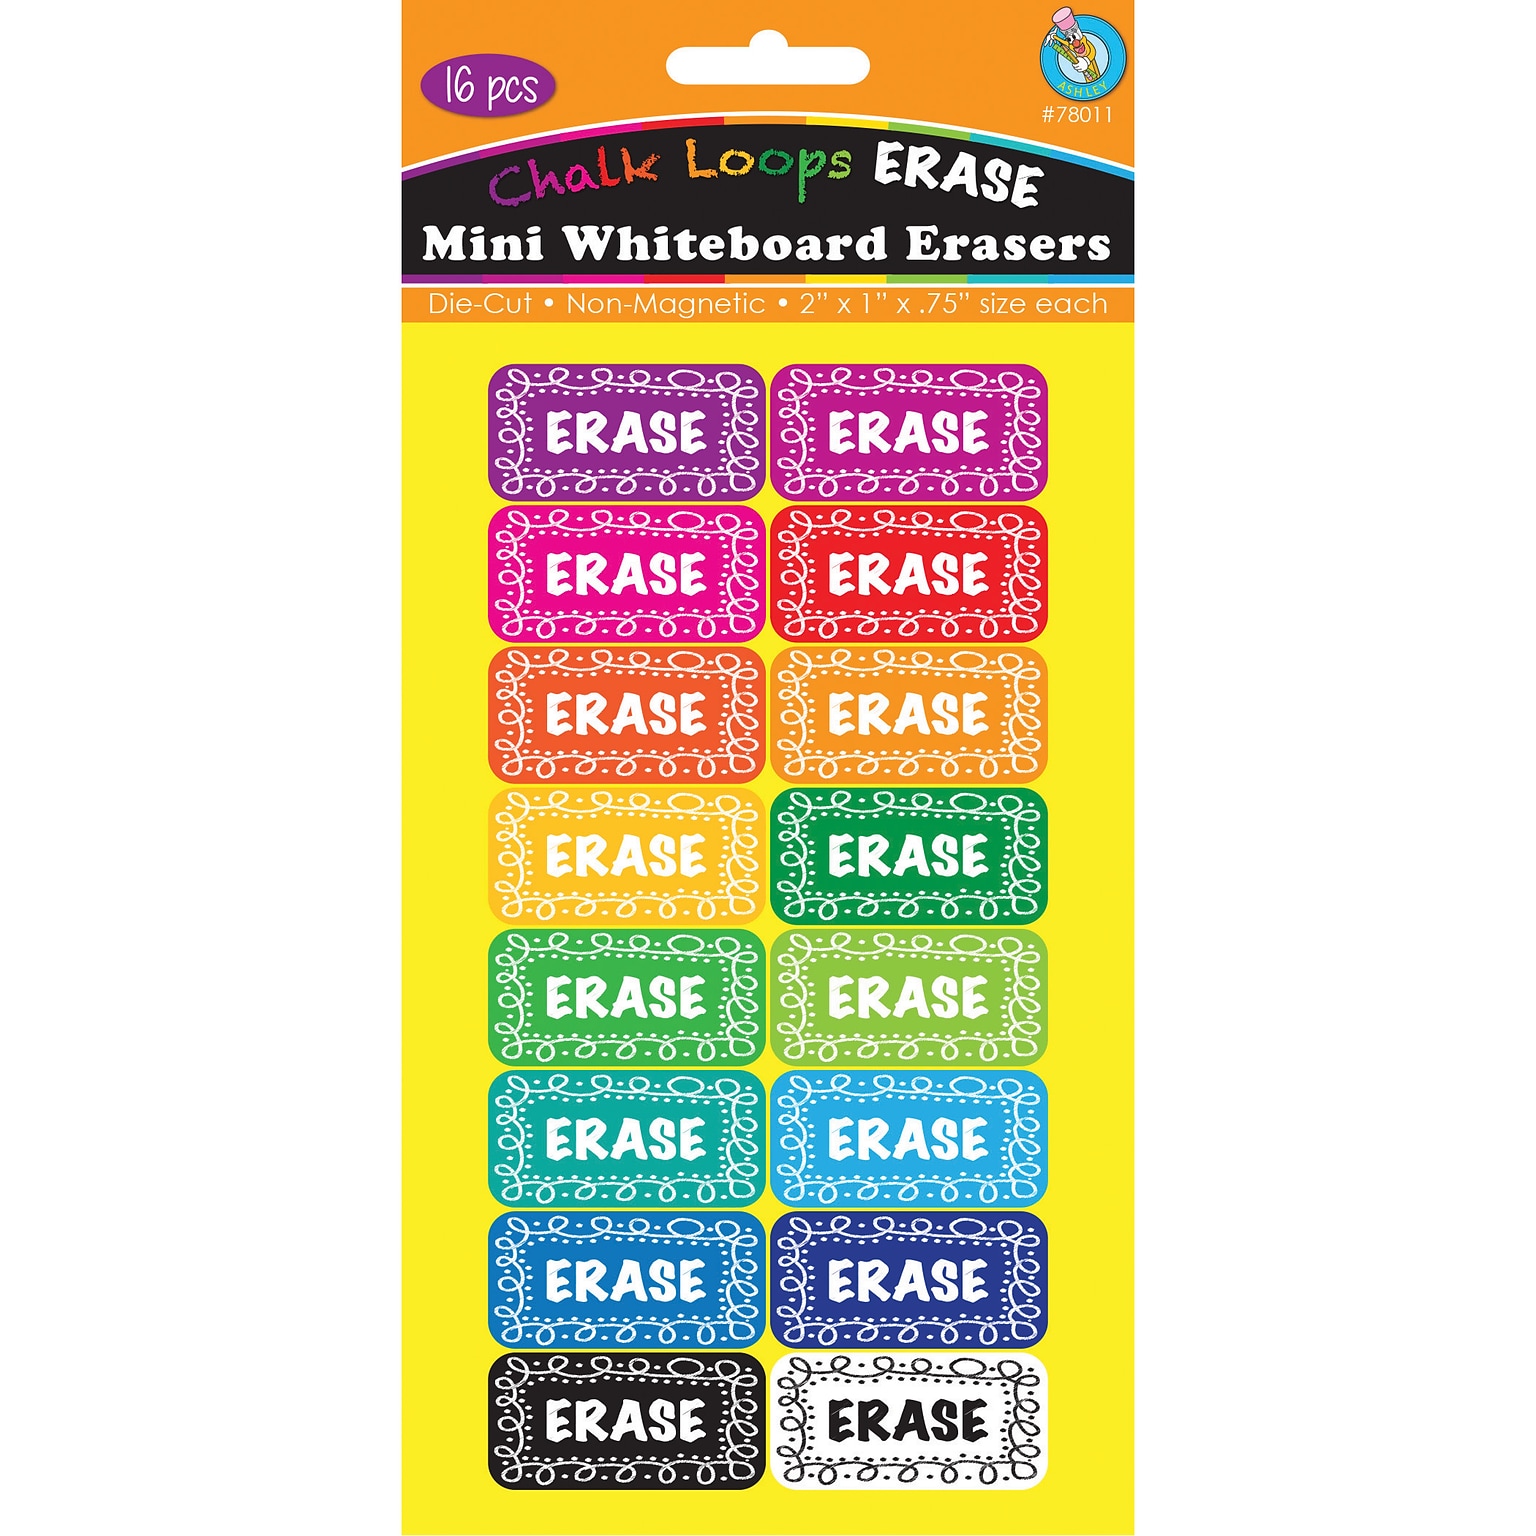 Ashley Productions® Mini Whiteboard Erasers, Chalkboard Loops Assorted Colors, 2 x 1 x 0.75, Pack of 16 (ASH78011)